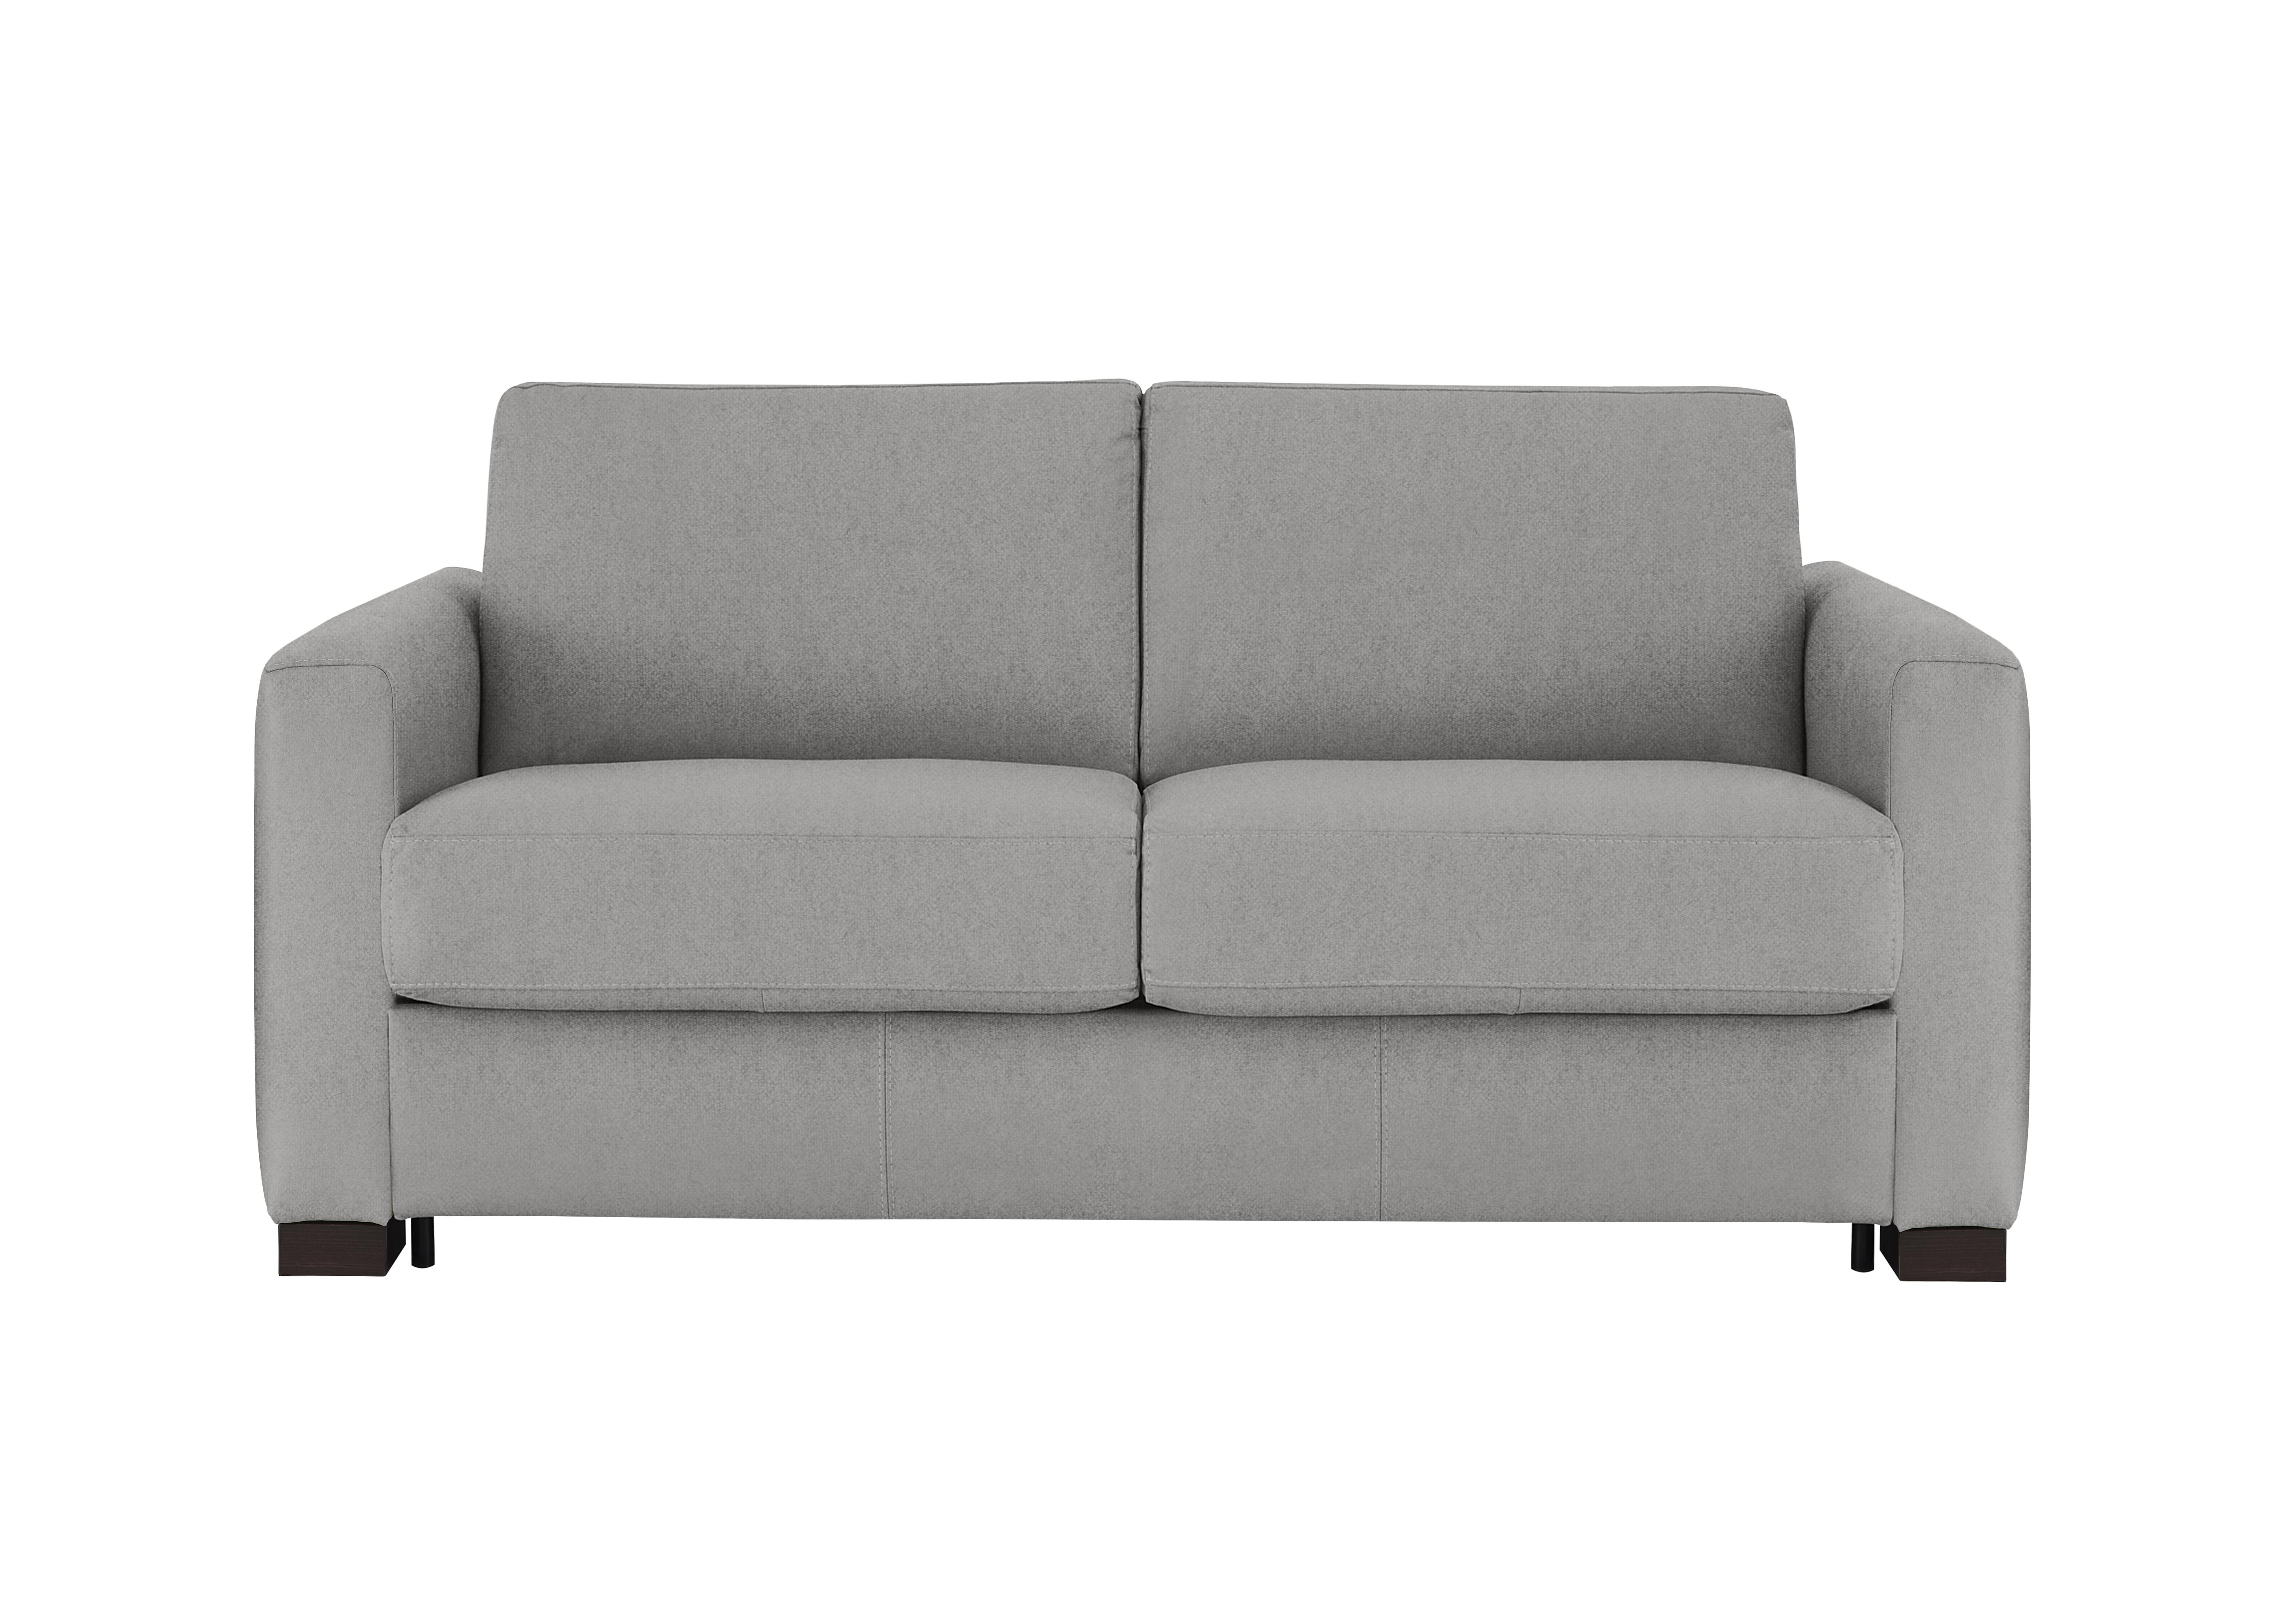 Alcova 2 Seater Fabric Sofa Bed with Box Arms in Fuente Ash on Furniture Village